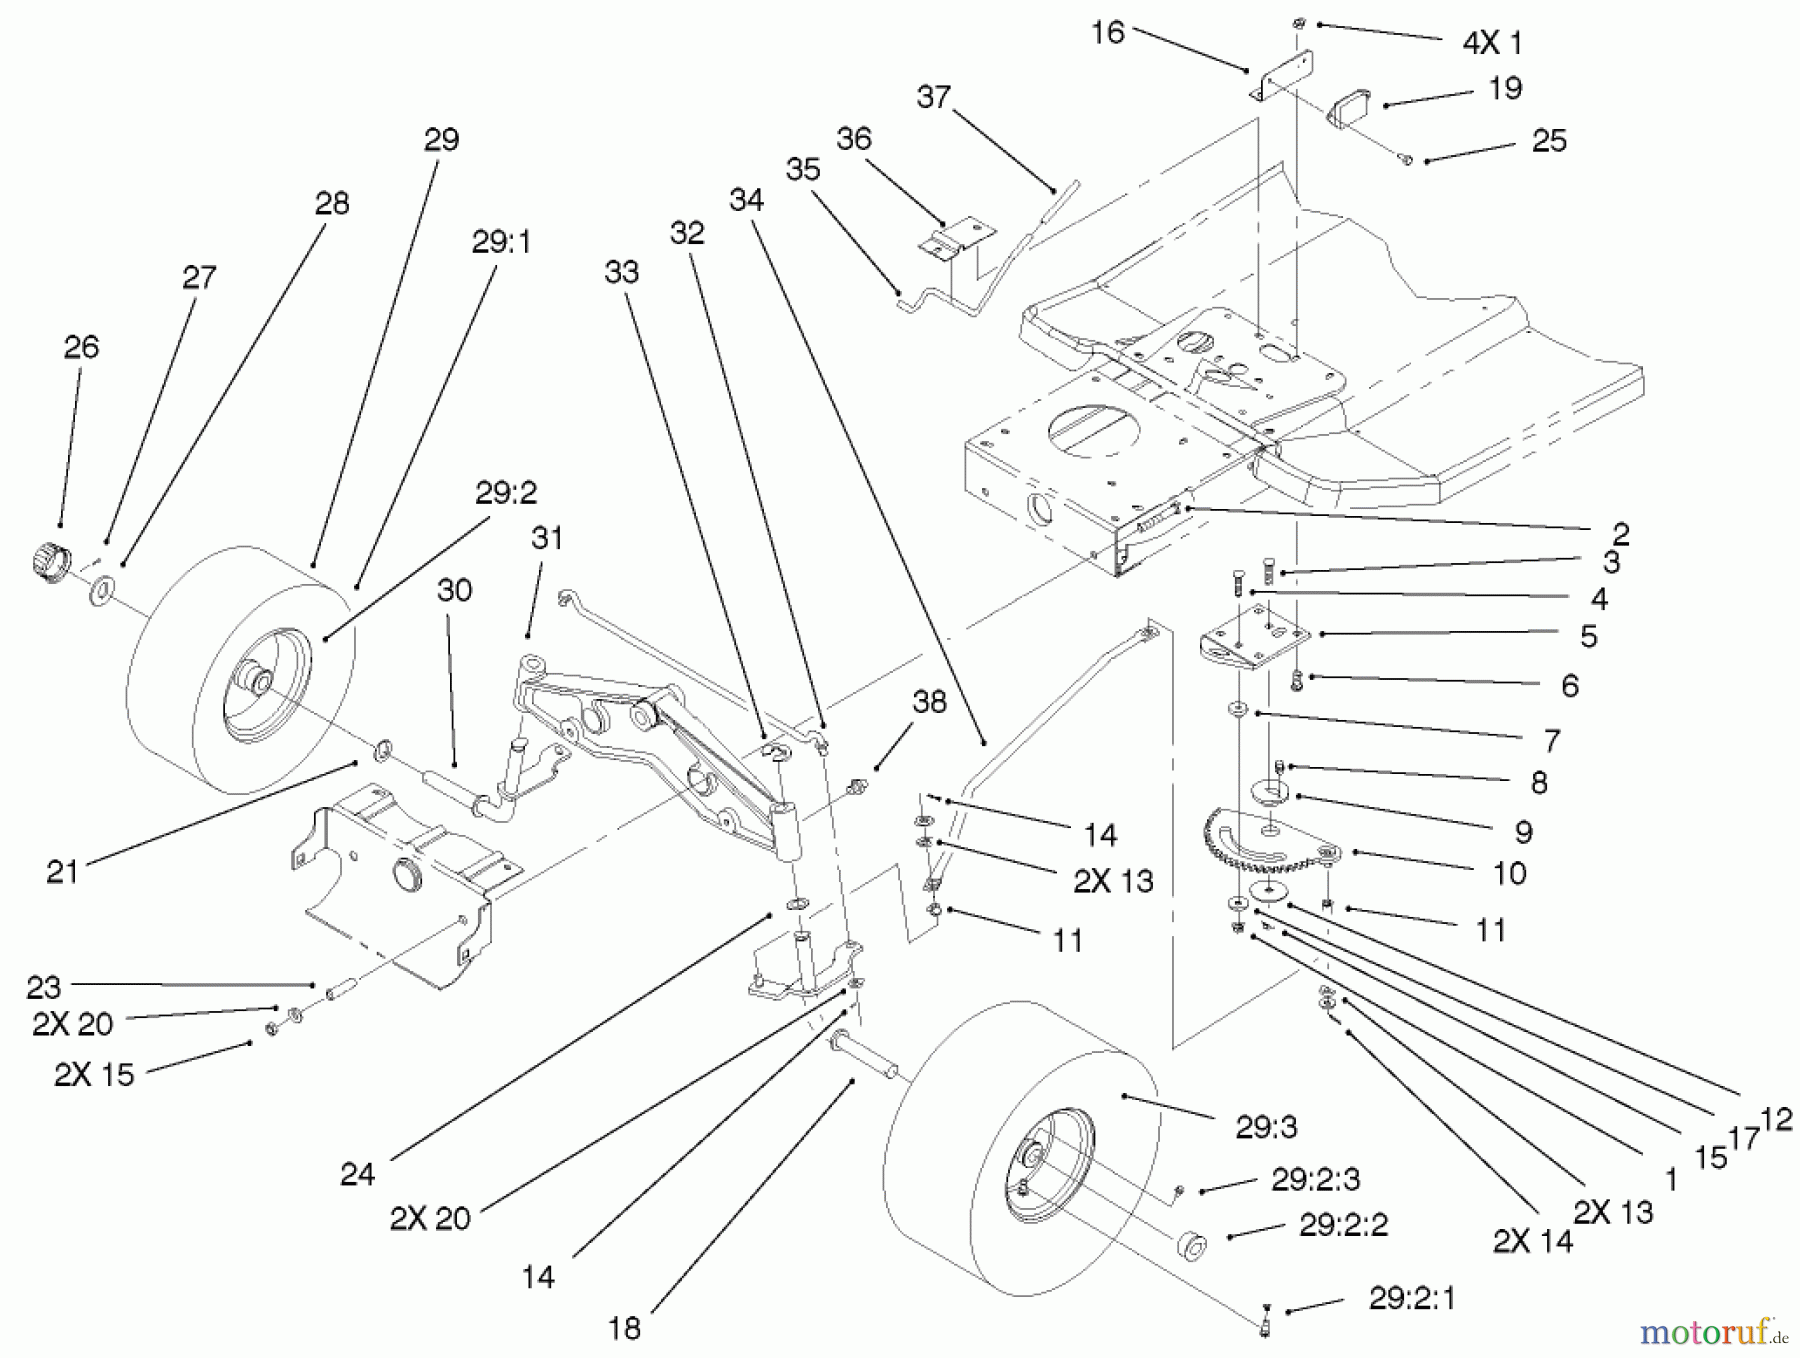  Toro Neu Mowers, Lawn & Garden Tractor Seite 1 71209 (13-32XLE) - Toro 13-32XLE Lawn Tractor, 2001 (210000001-210999999) STEERING COMPONENTS ASSEMBLY